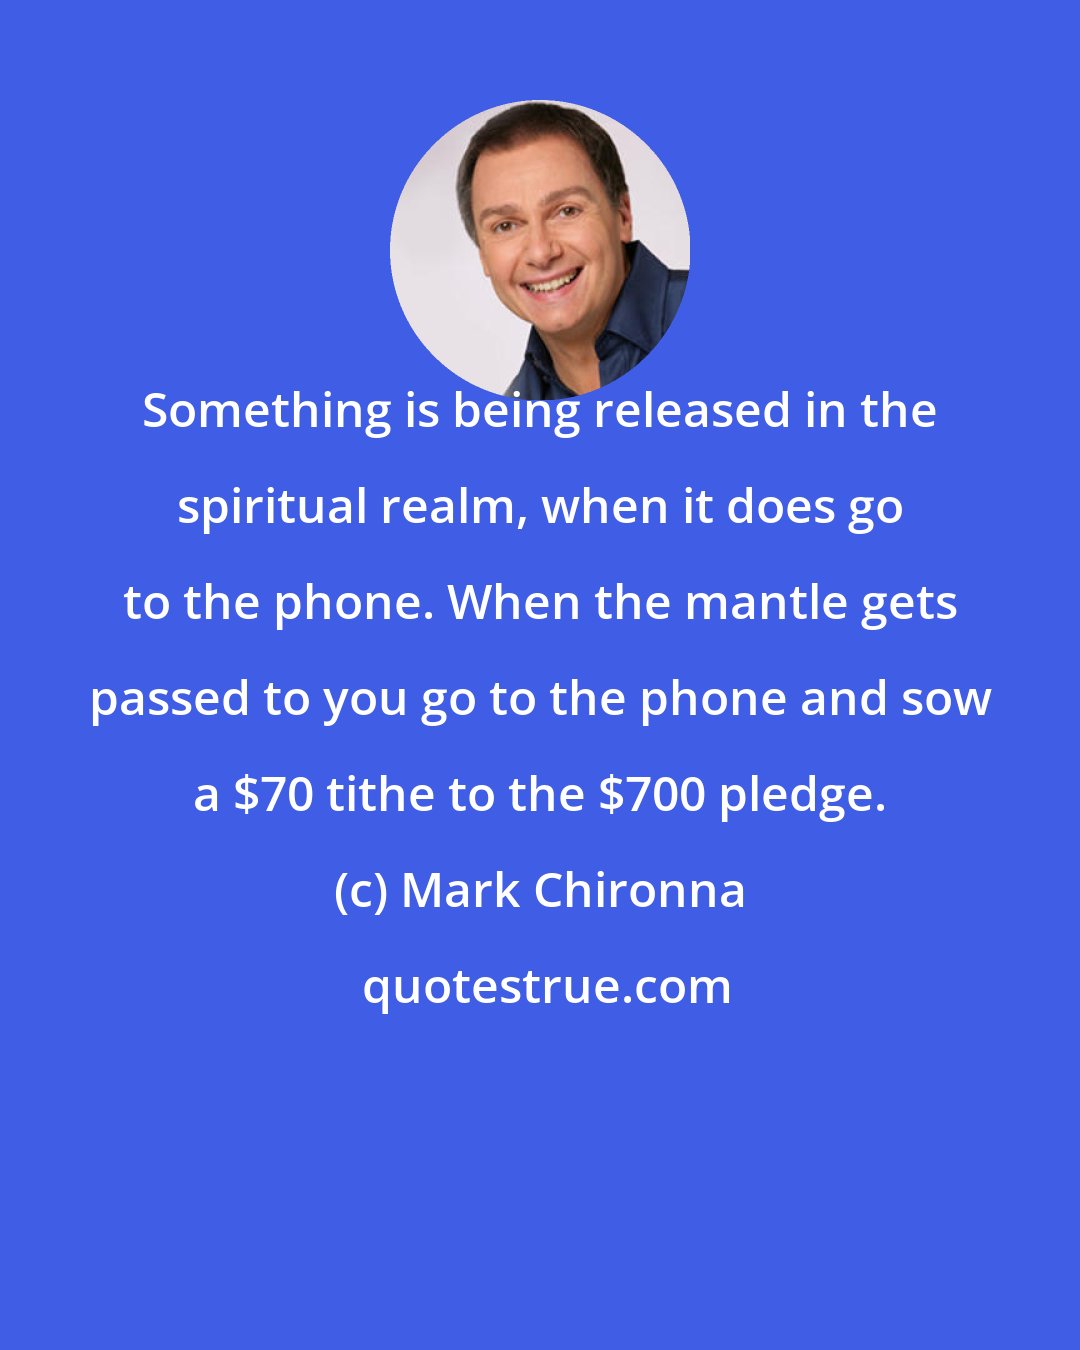 Mark Chironna: Something is being released in the spiritual realm, when it does go to the phone. When the mantle gets passed to you go to the phone and sow a $70 tithe to the $700 pledge.